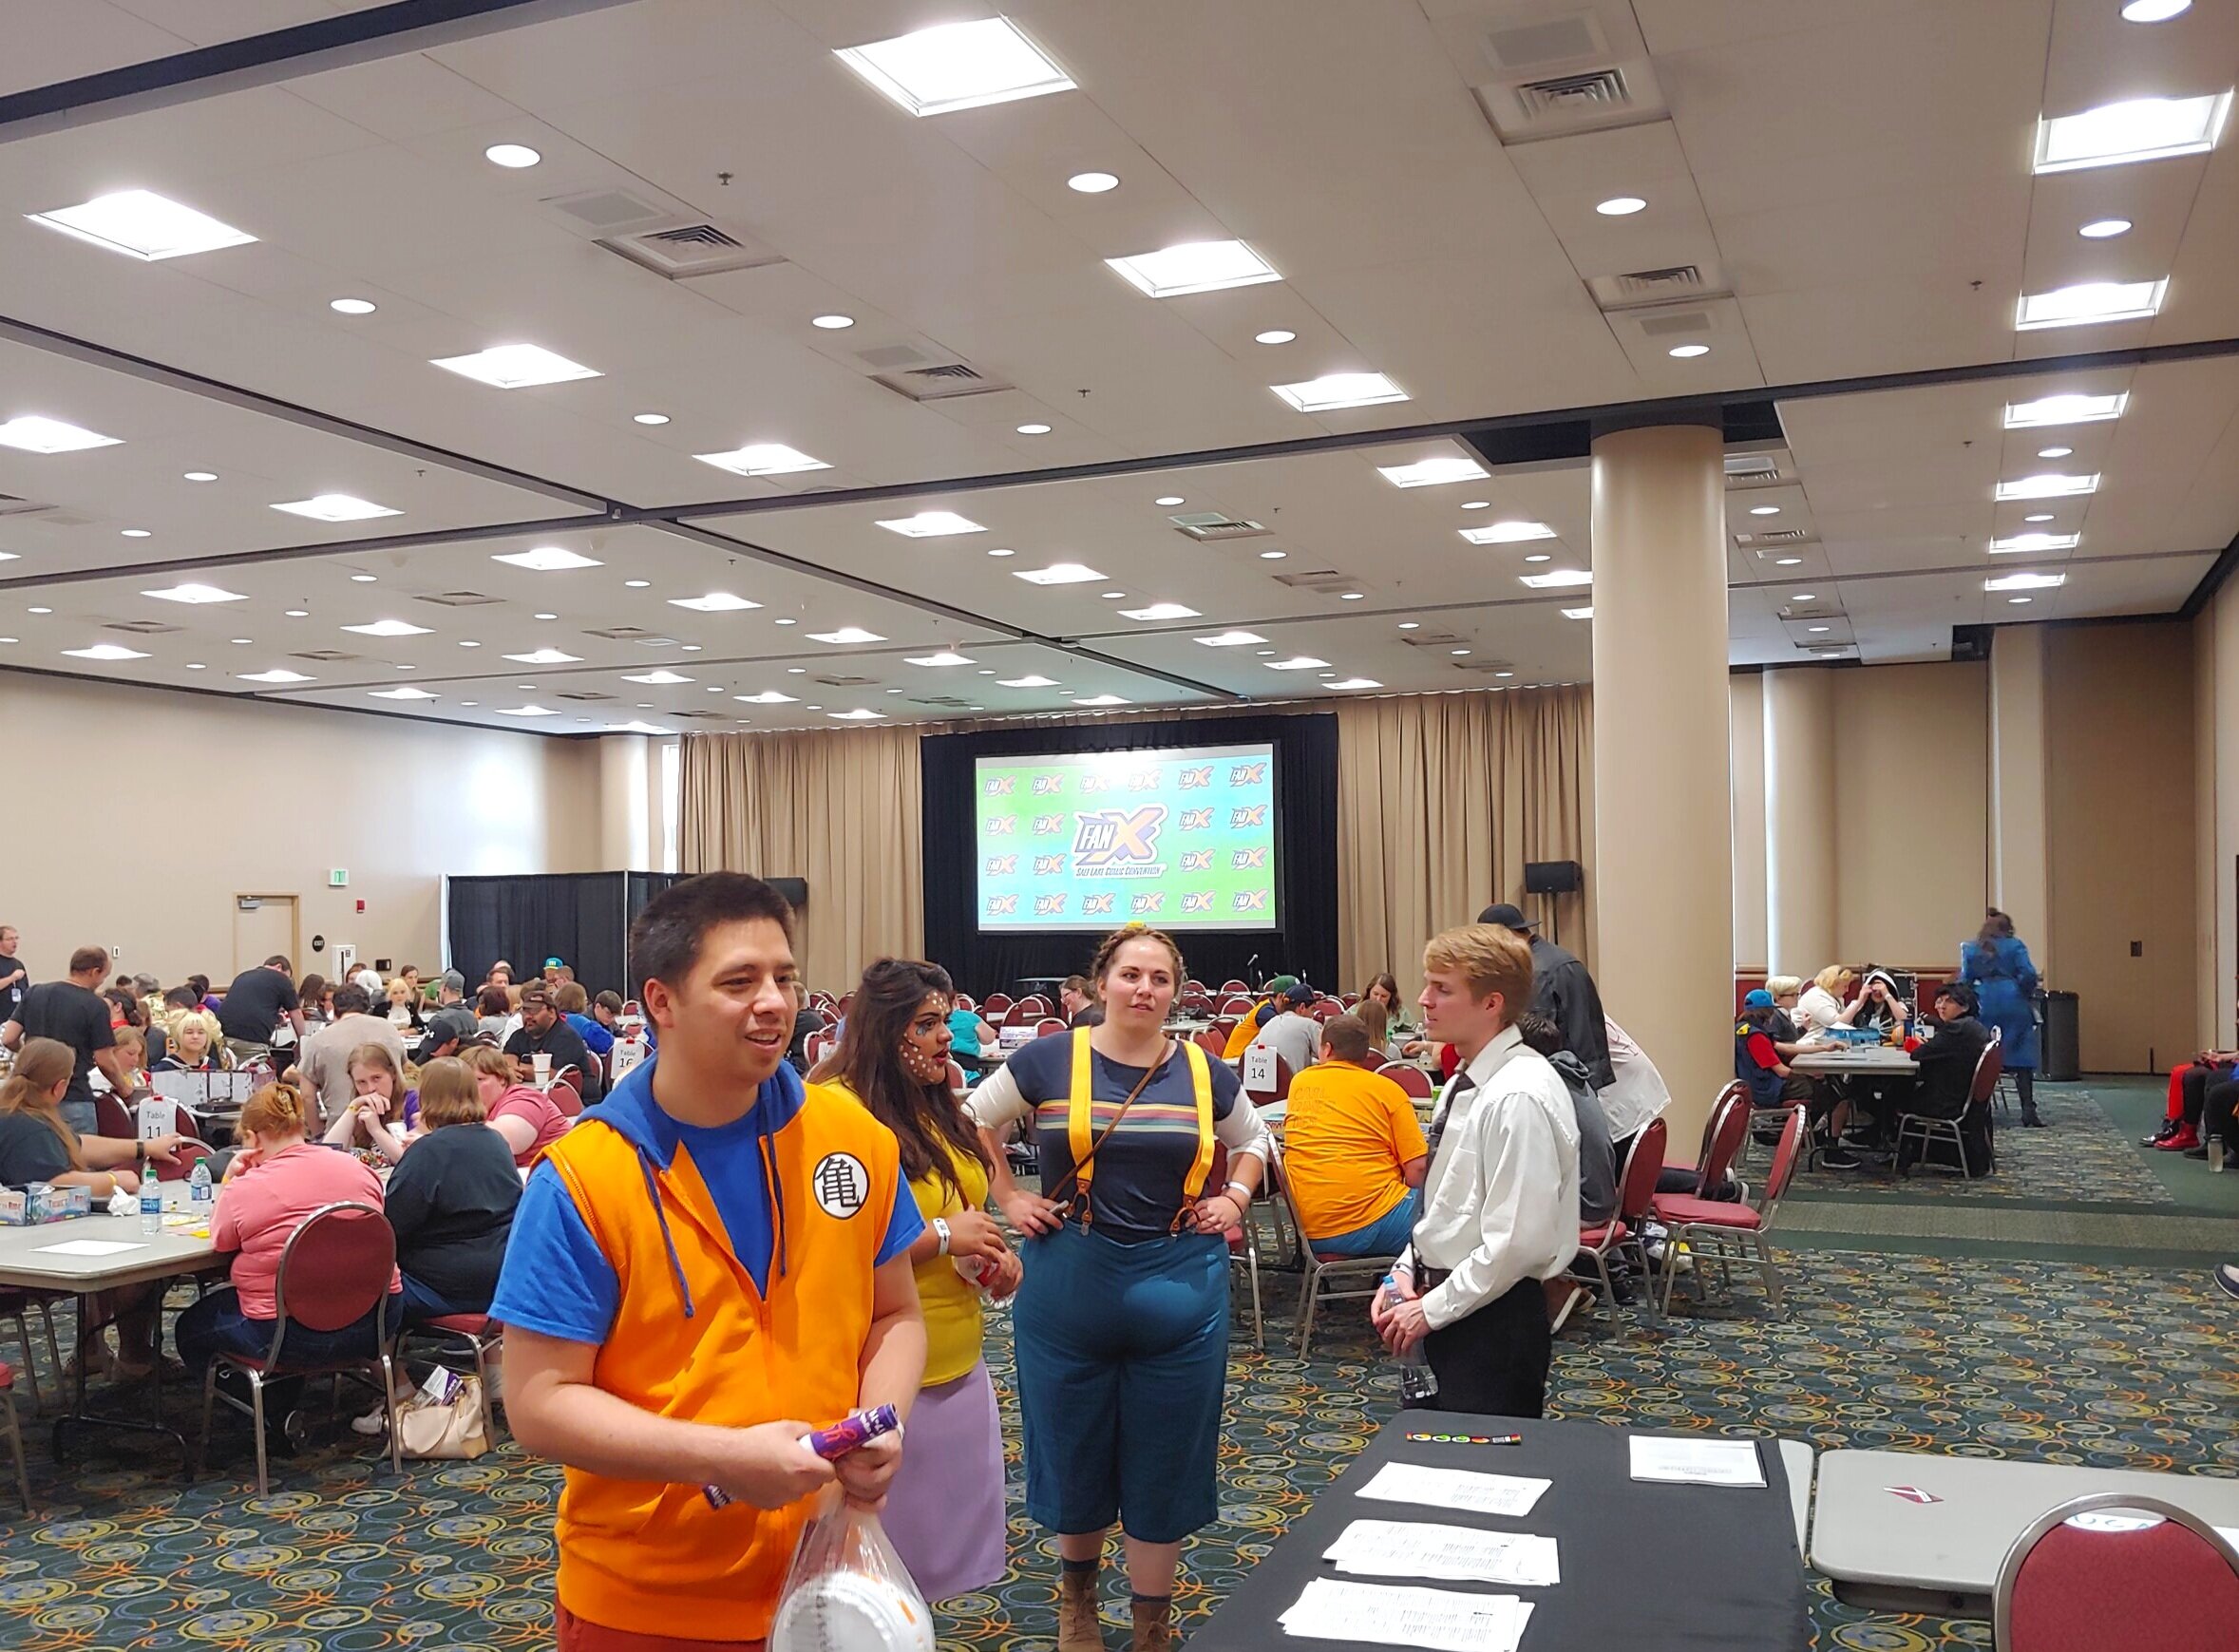 FanX guests bidding on items in charity auction